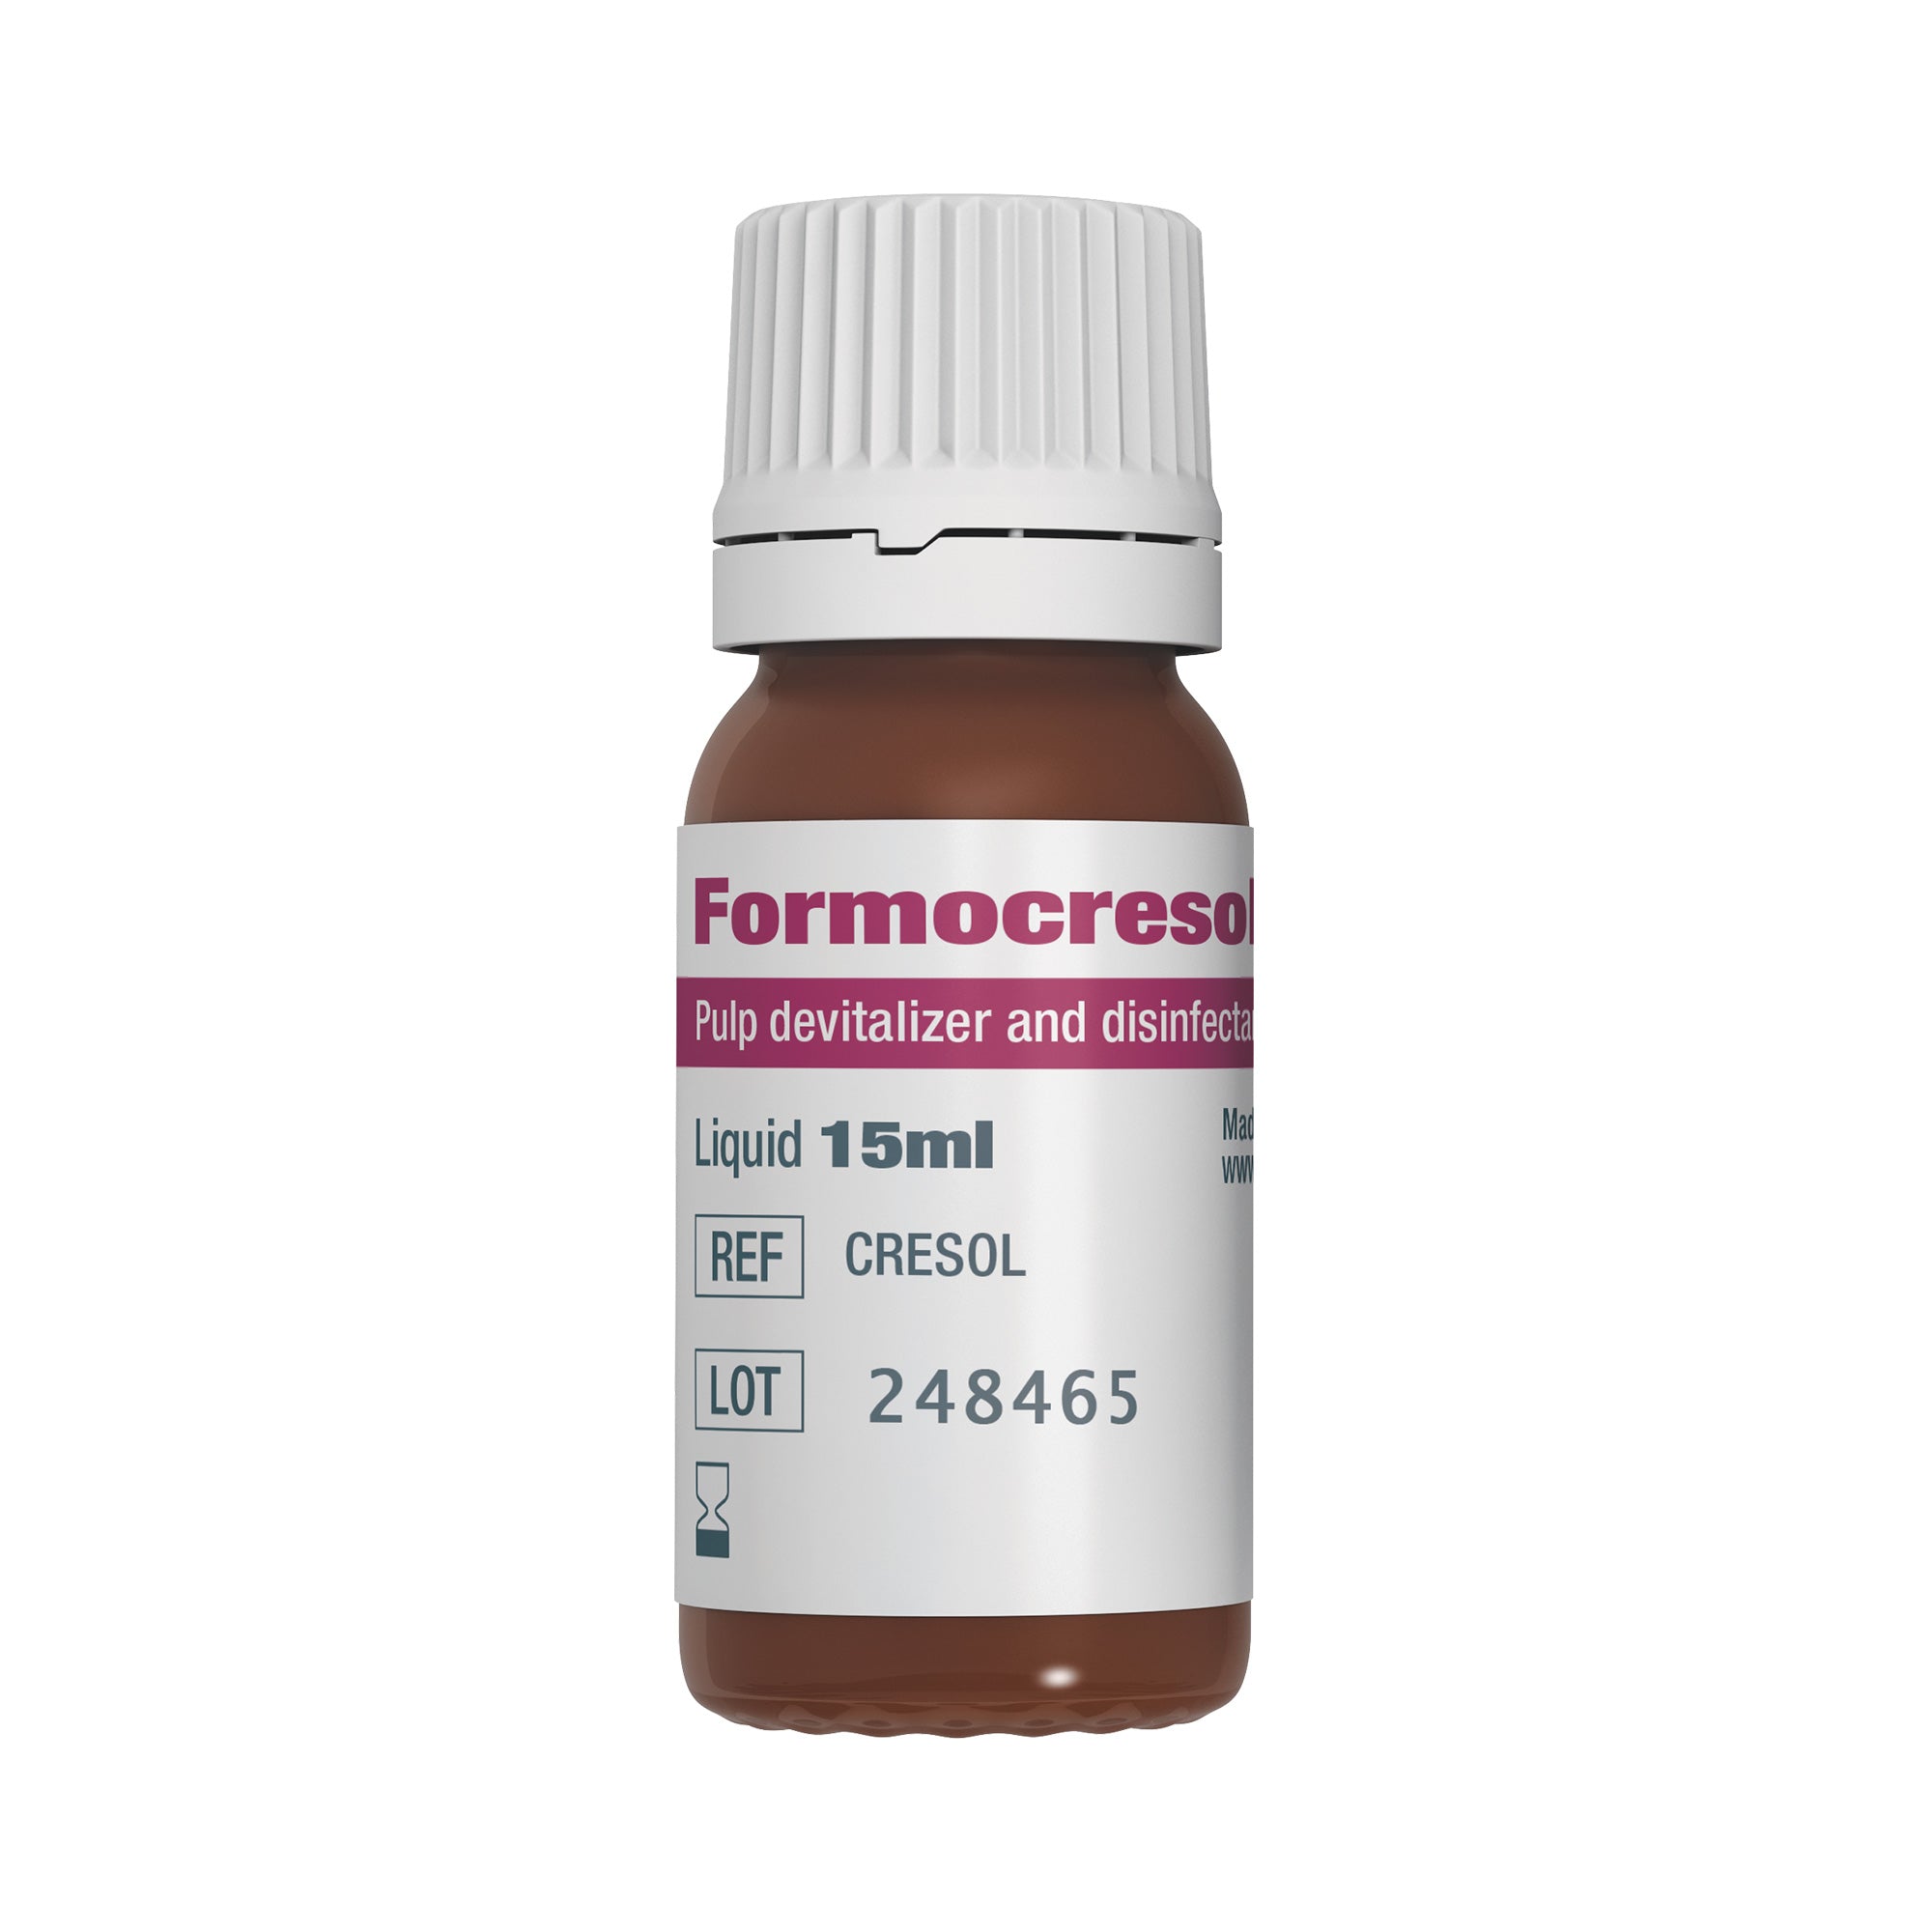 DSI Dental Formocresol For Root Canal and Pulpotomy Treatment